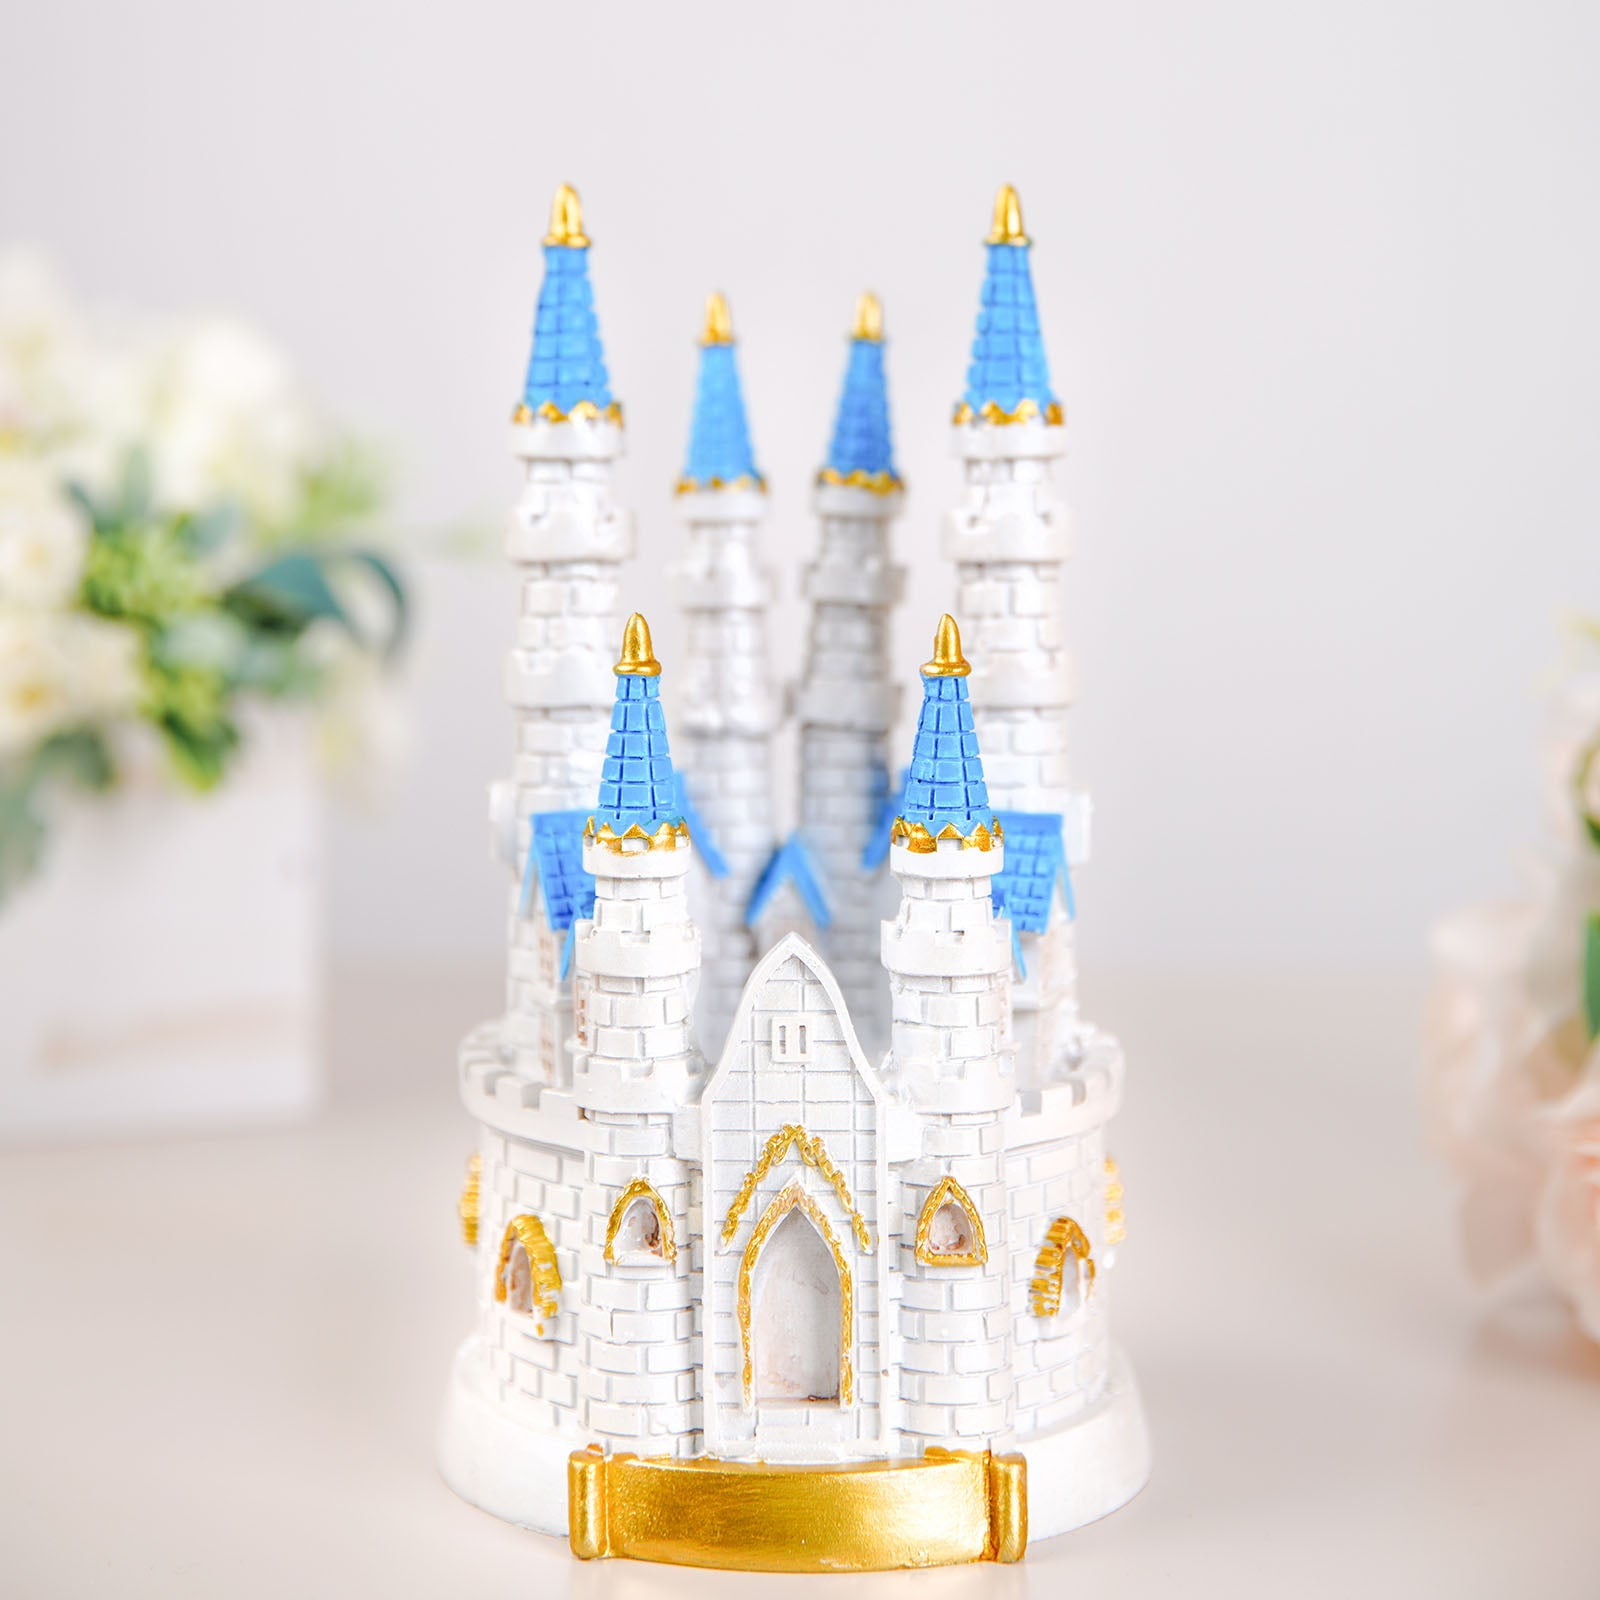 Details about   Wilton Cinderella Carriage Cake Topper Romantic Fairytale Wedding Shabby Cottage 